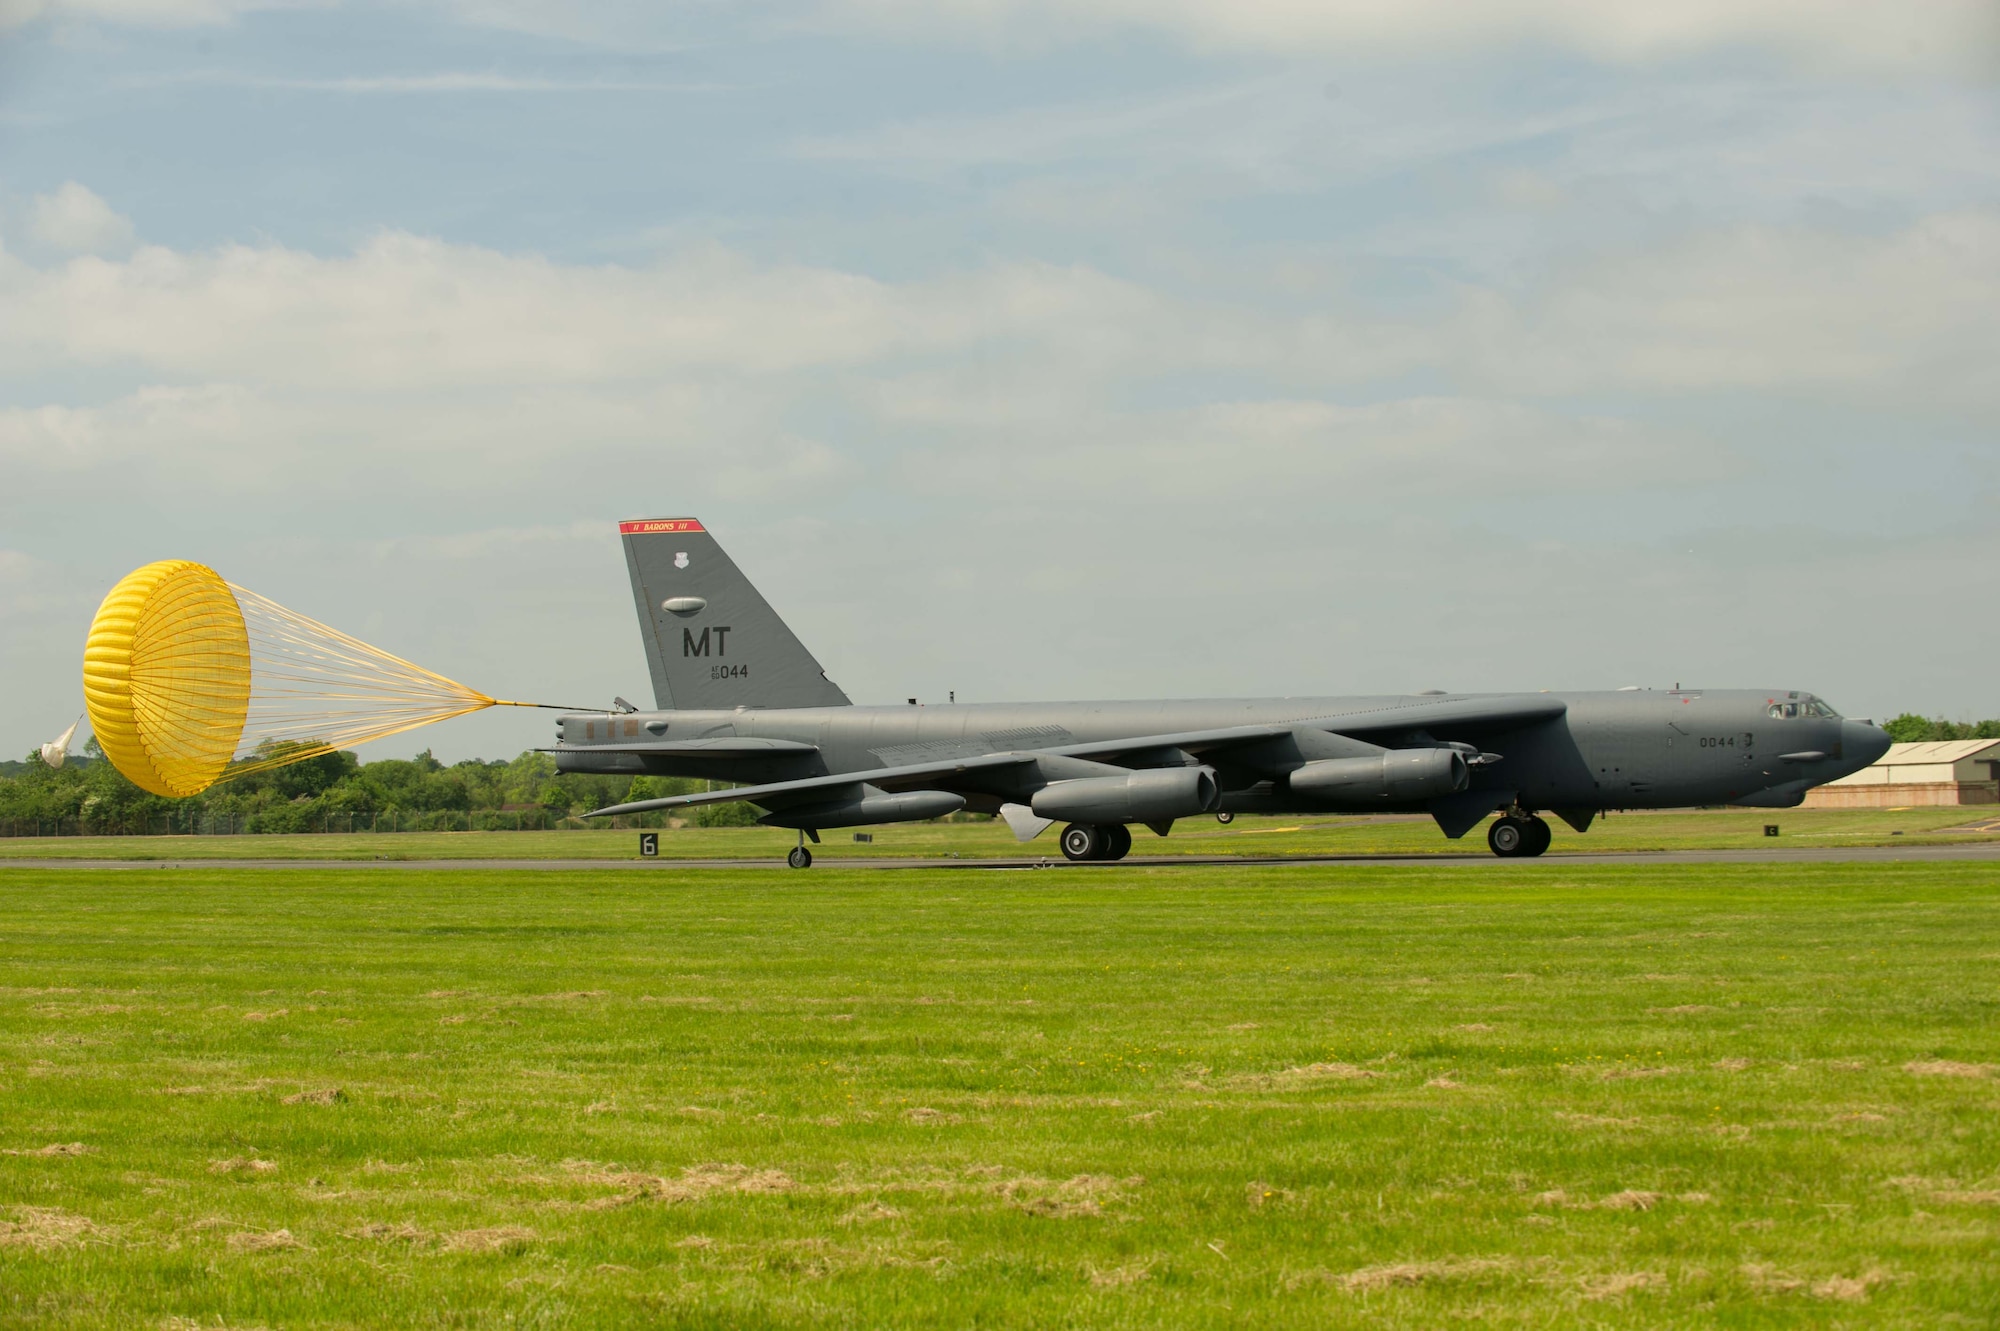 A B-52H Stratofortress from Minot Air Force Base, N.D., taxis down the runway at Royal Air Force Fairford, United Kingdom, in support of exercises Saber Strike 16 and BALTOPS 16, June 2, 2016. The B-52 is capable of carrying up to approximately 70,000 lbs. of munitions. These include gravity bombs, cluster bombs, precision guided missiles and joint direct attack munitions.  (U.S. Air Force photo/Senior Airman Sahara L. Fales)